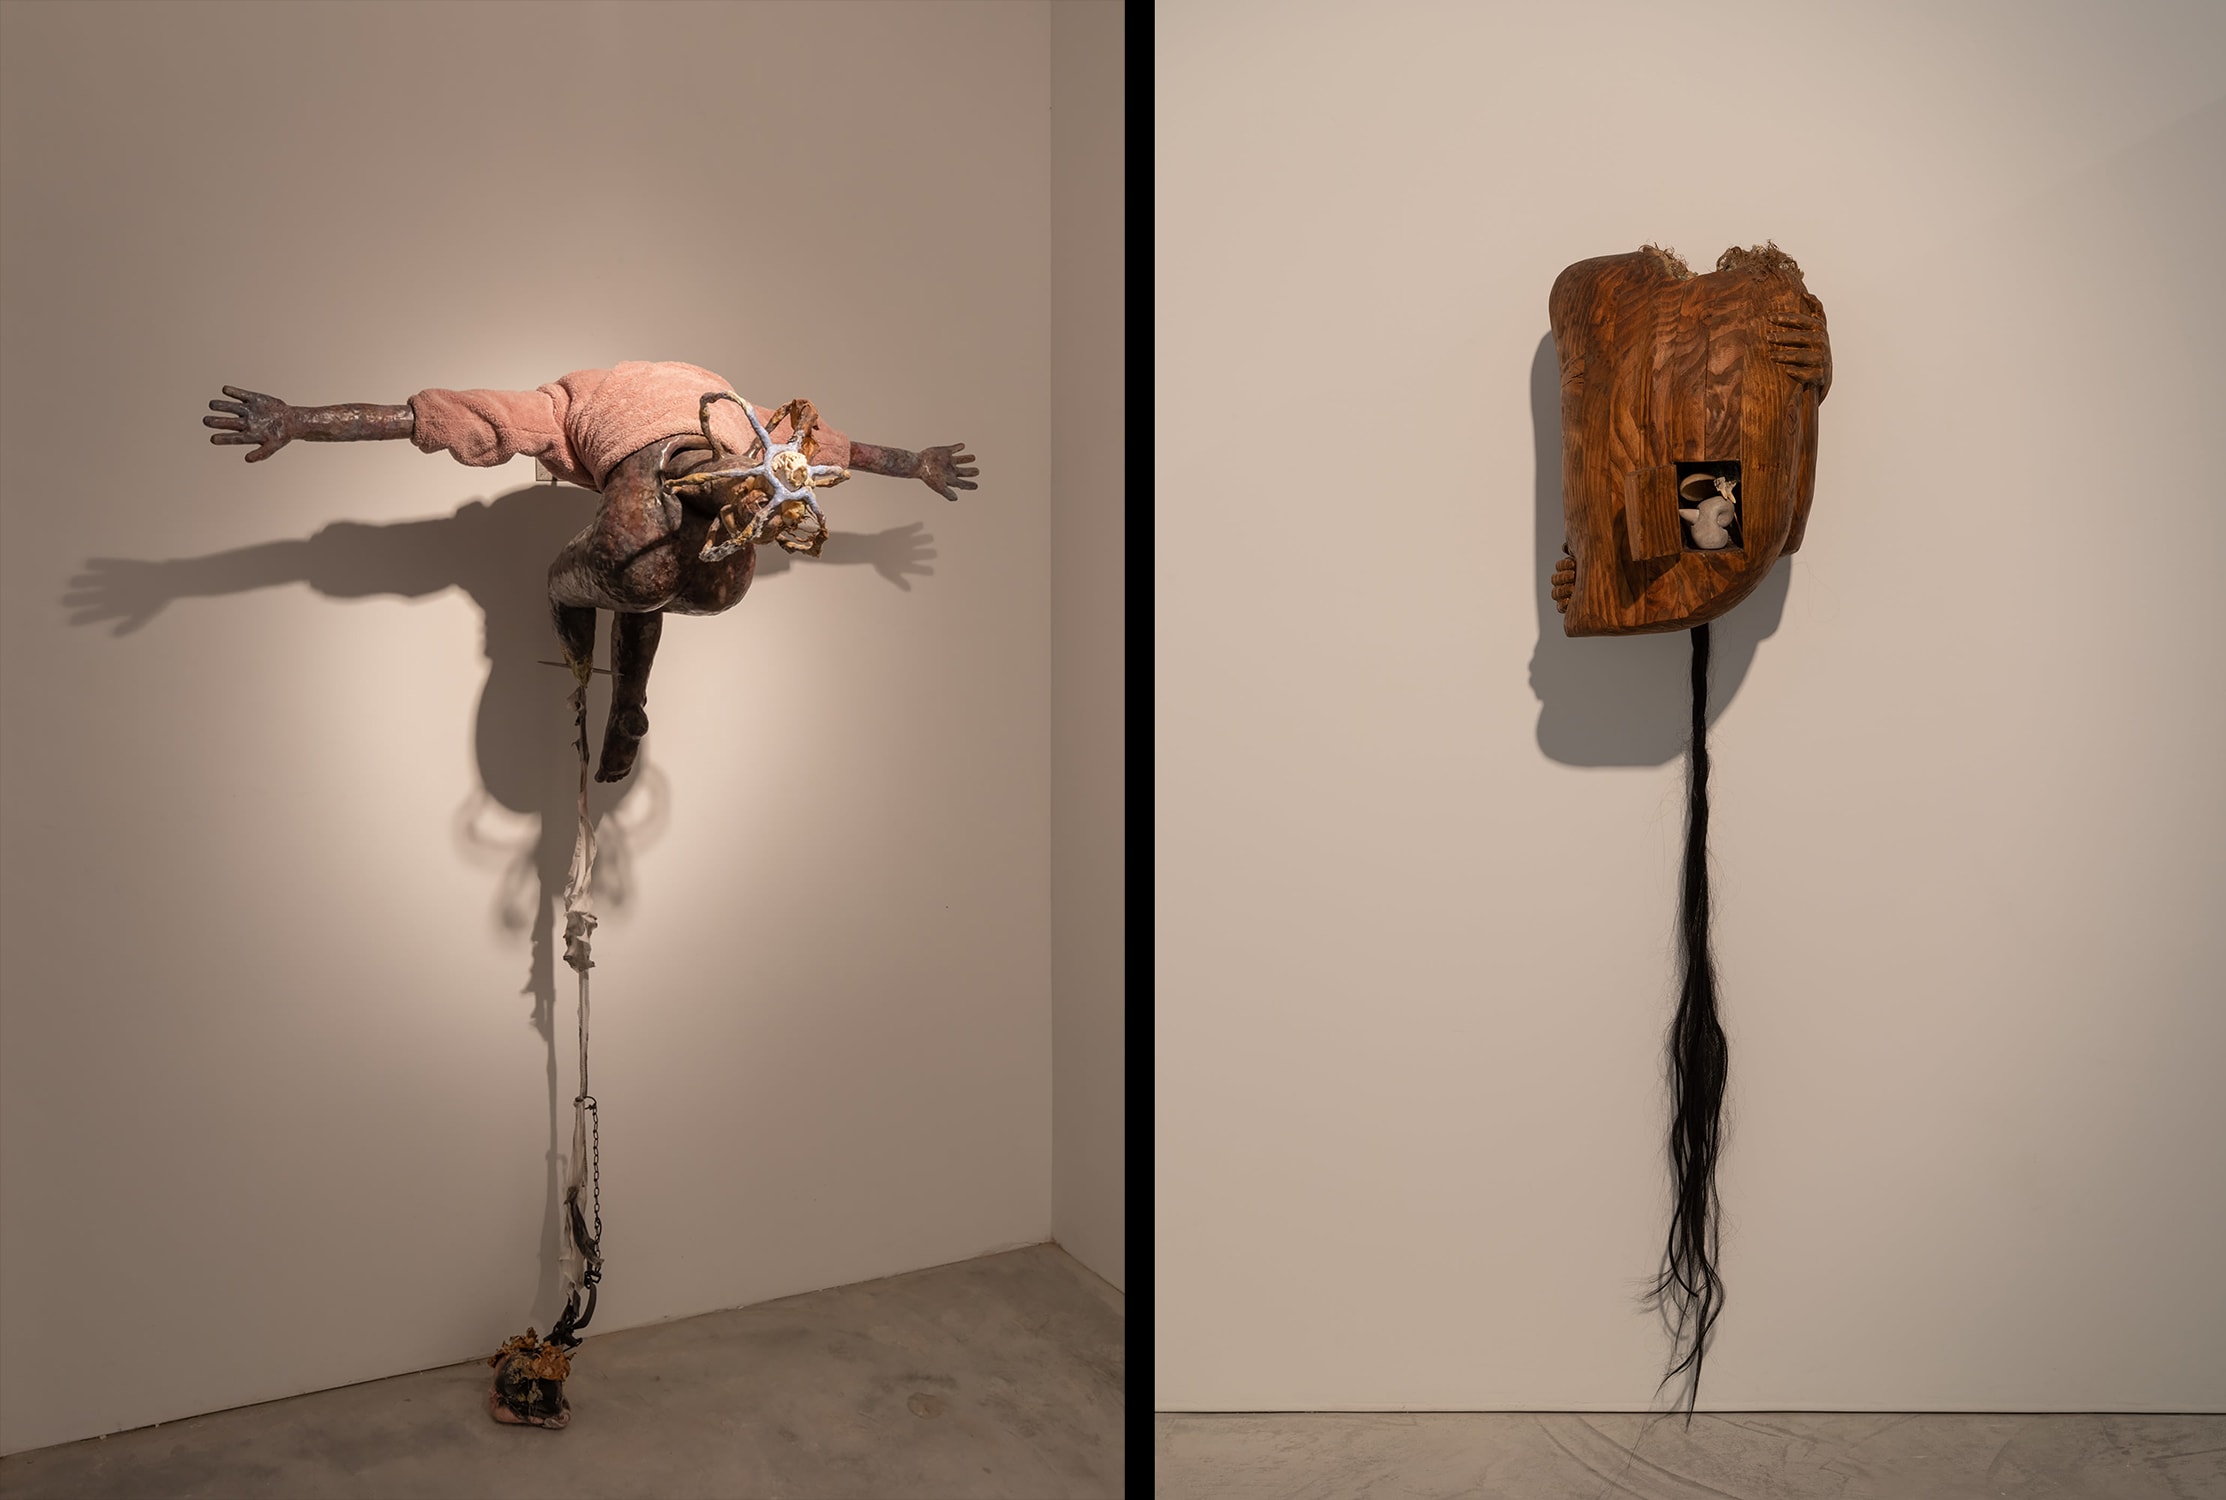 Left: Catalina Ouyang, force of will (dog self), 2021. Right: Catalina Ouyang, reliquary corpus (lash of hope), 2021. Courtesy of Lyles & King, New York City.